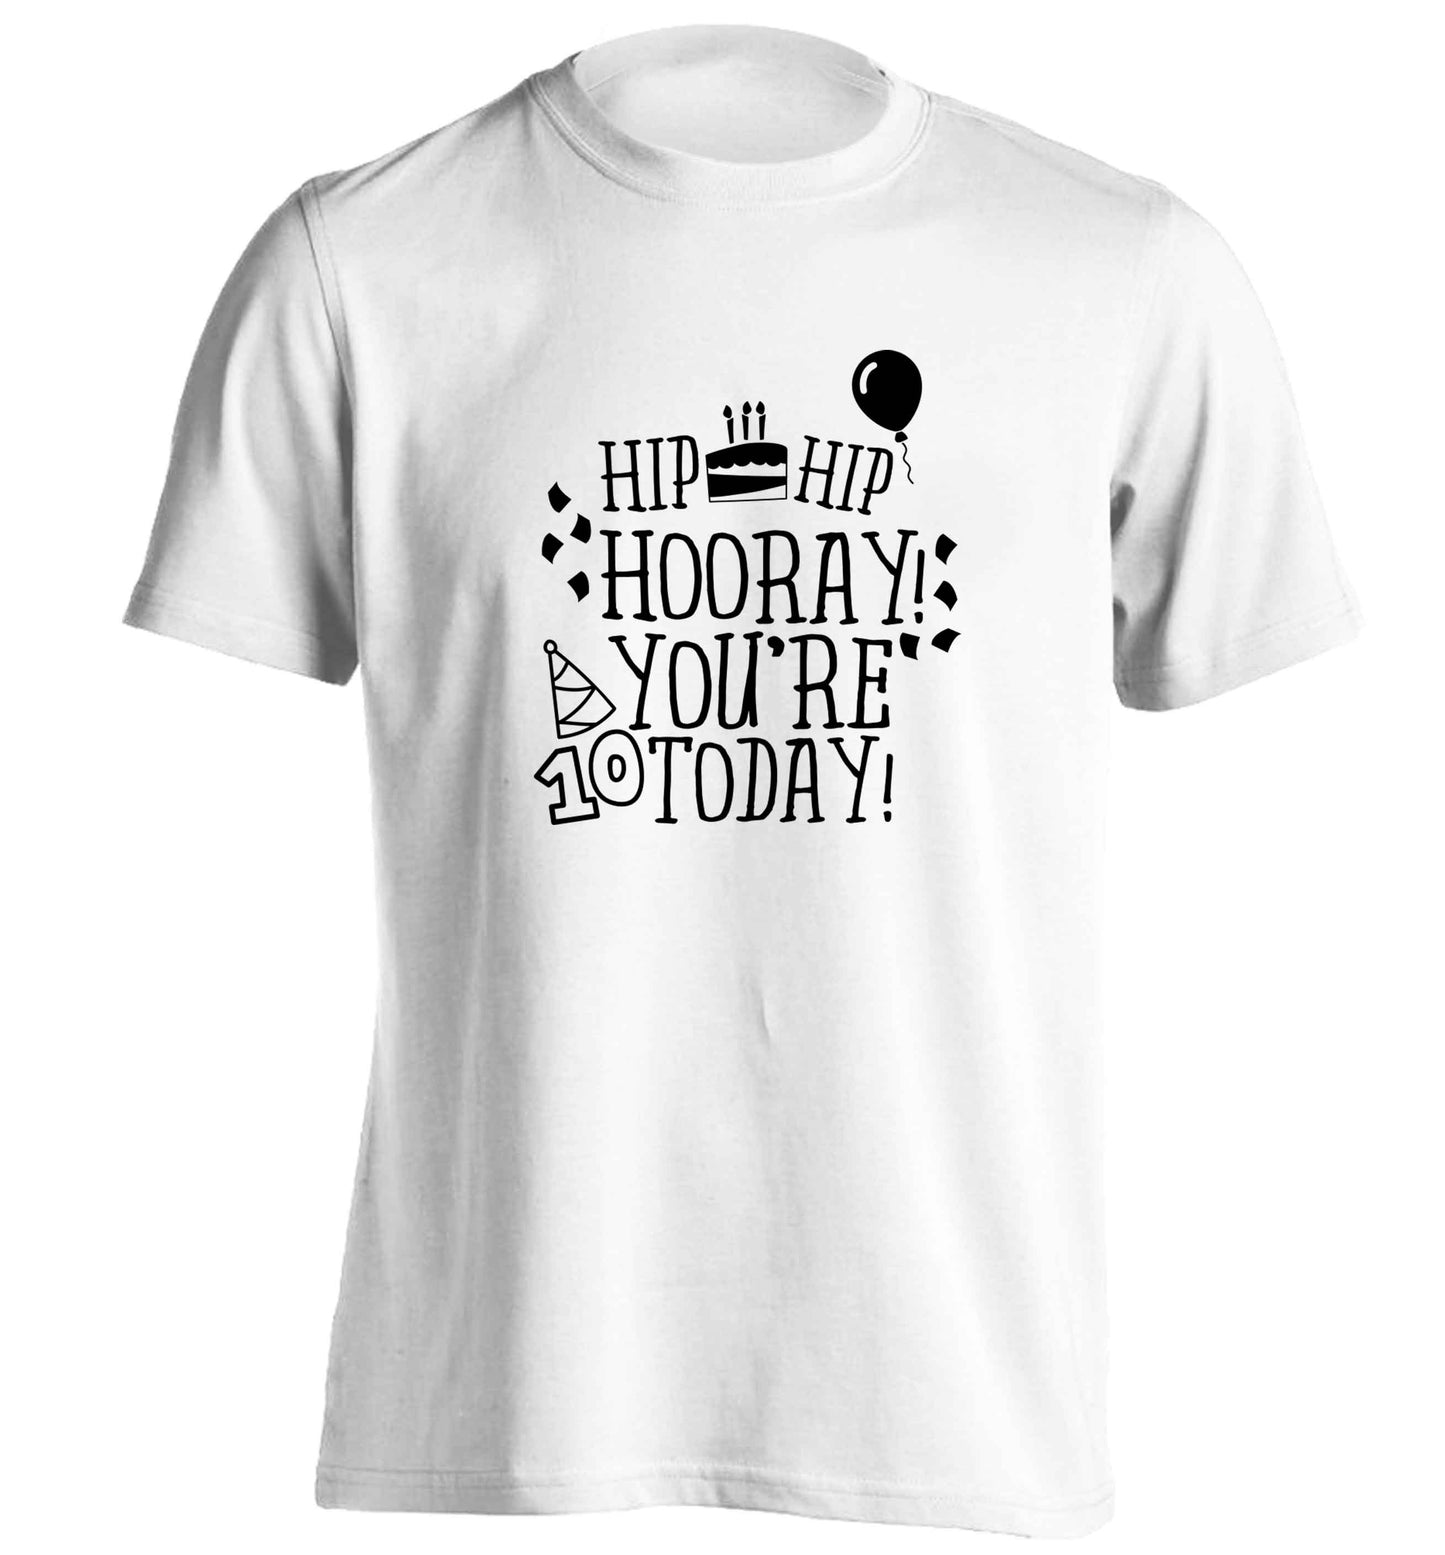 Hip hip hooray you're ten today! adults unisex white Tshirt 2XL